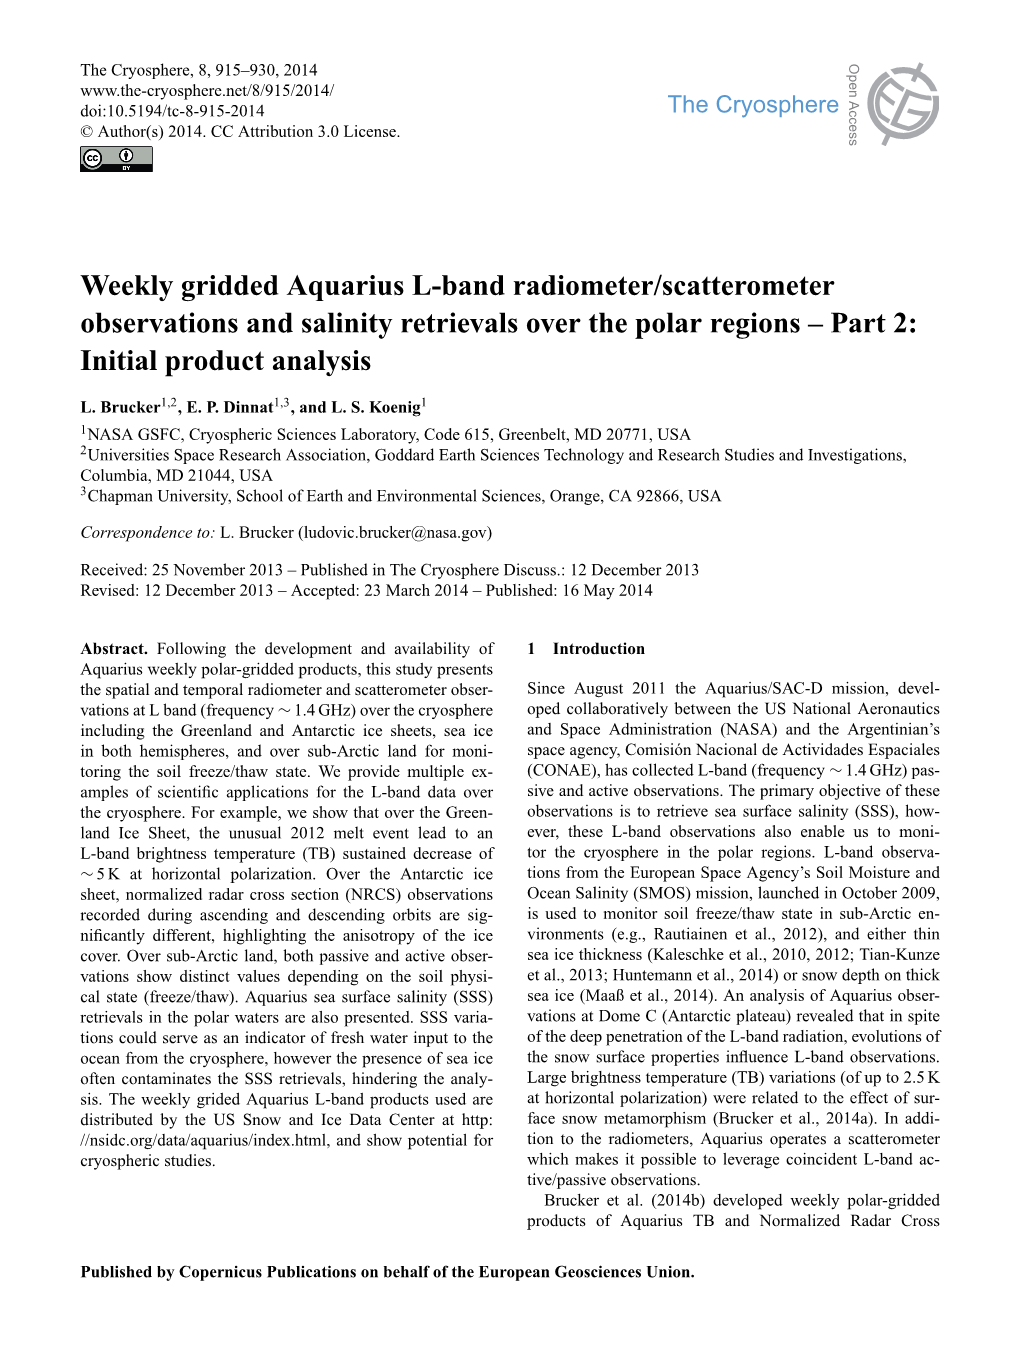 Weekly Gridded Aquarius L-Band Radiometer/Scatterometer Observations and Salinity Retrievals Over the Polar Regions – Part 2: Initial Product Analysis